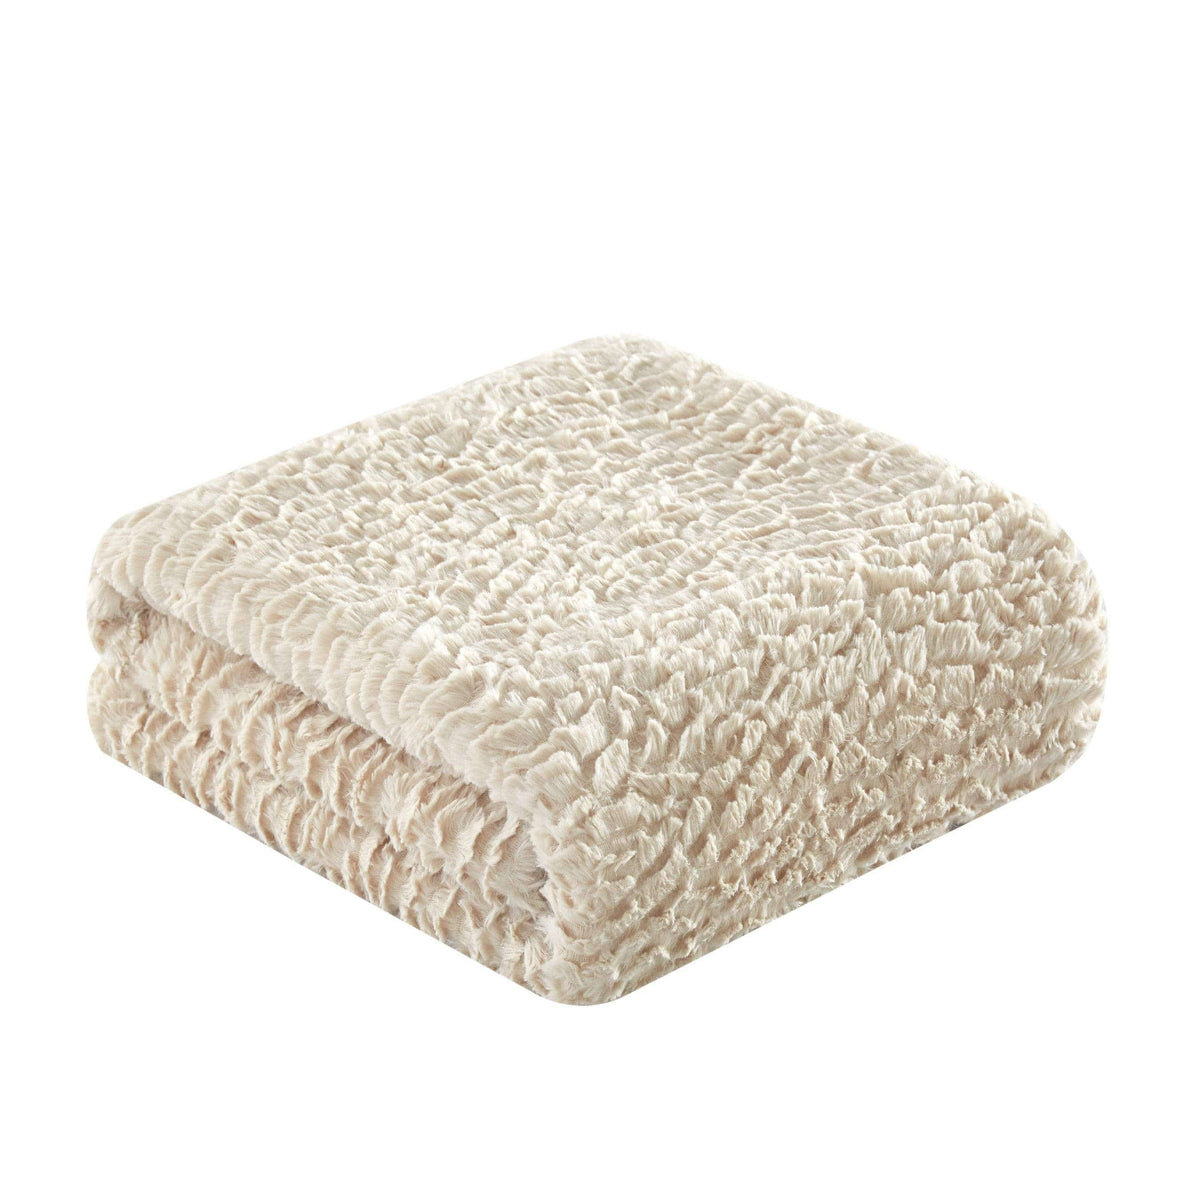 Chic Home Brianna Throw Blanket Cozy Super Soft Ultra Plush Decorative Shaggy Faux Fur Sherpa Lined 